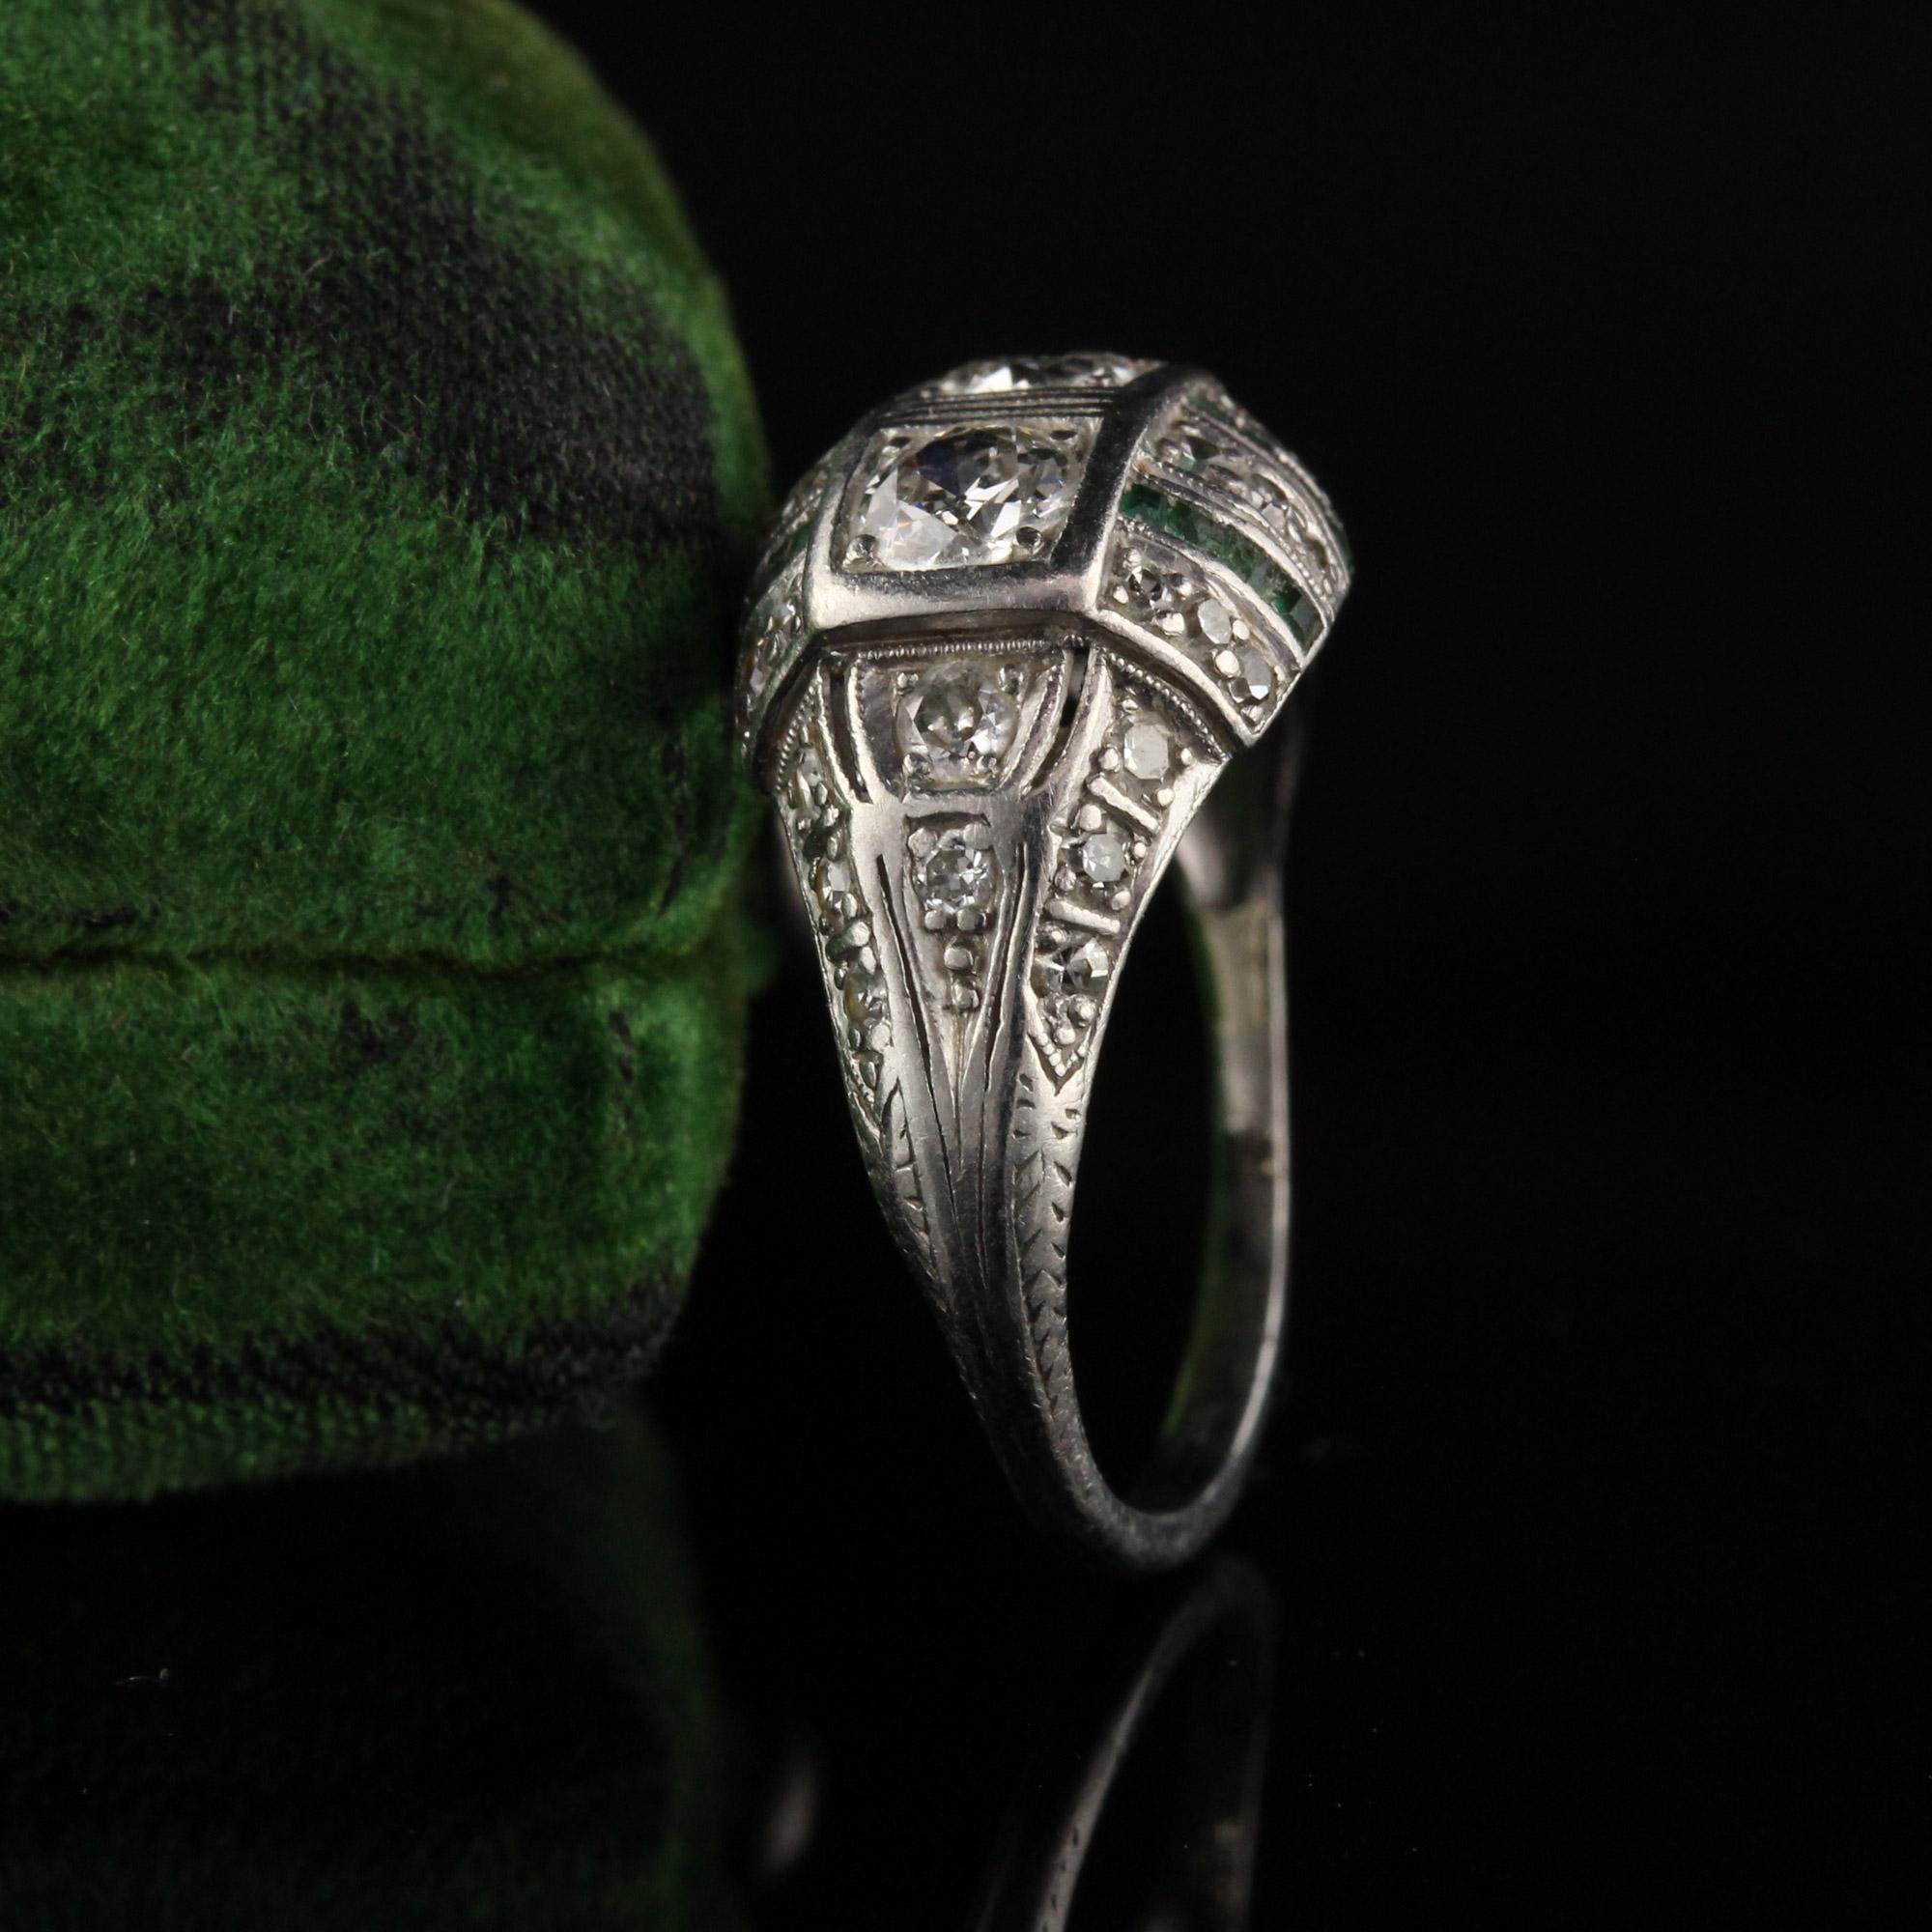 Beautiful Antique Engagement ring with old euro cut diamonds and emeralds. 

Item #R0553

Metal: Platinum

Weight: 3.5 Grams

Total Diamond Weight: Approximately 1.00 cts

Diamond Color: H

Diamond Clarity: SI1

Ring Size: 6

This ring can be sized